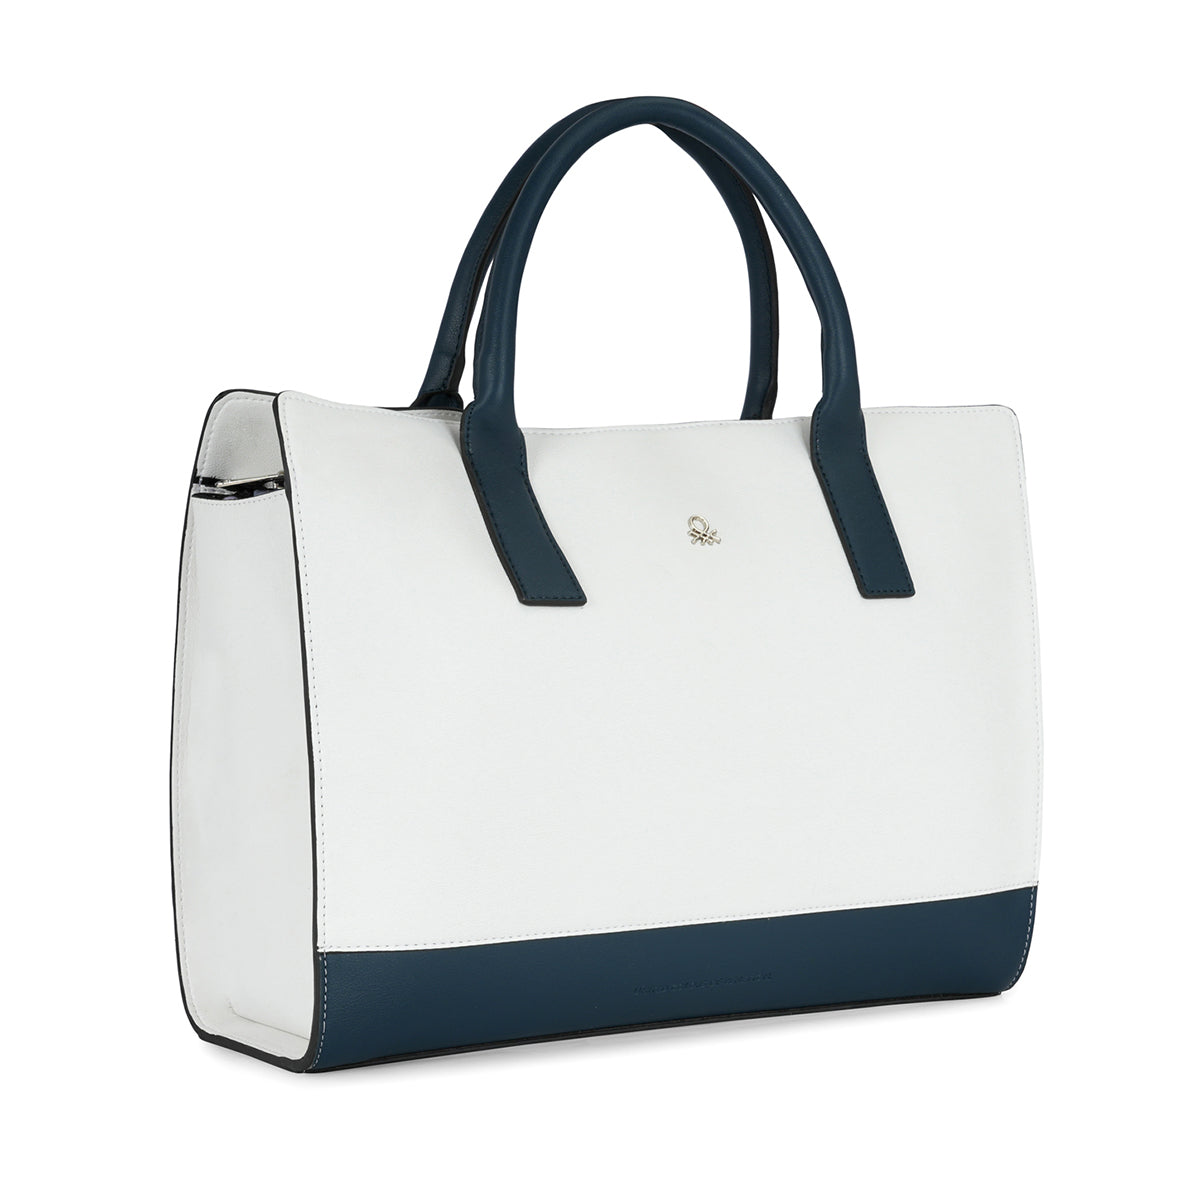 United Colors of Benetton Elisa Woman's PU Tote White